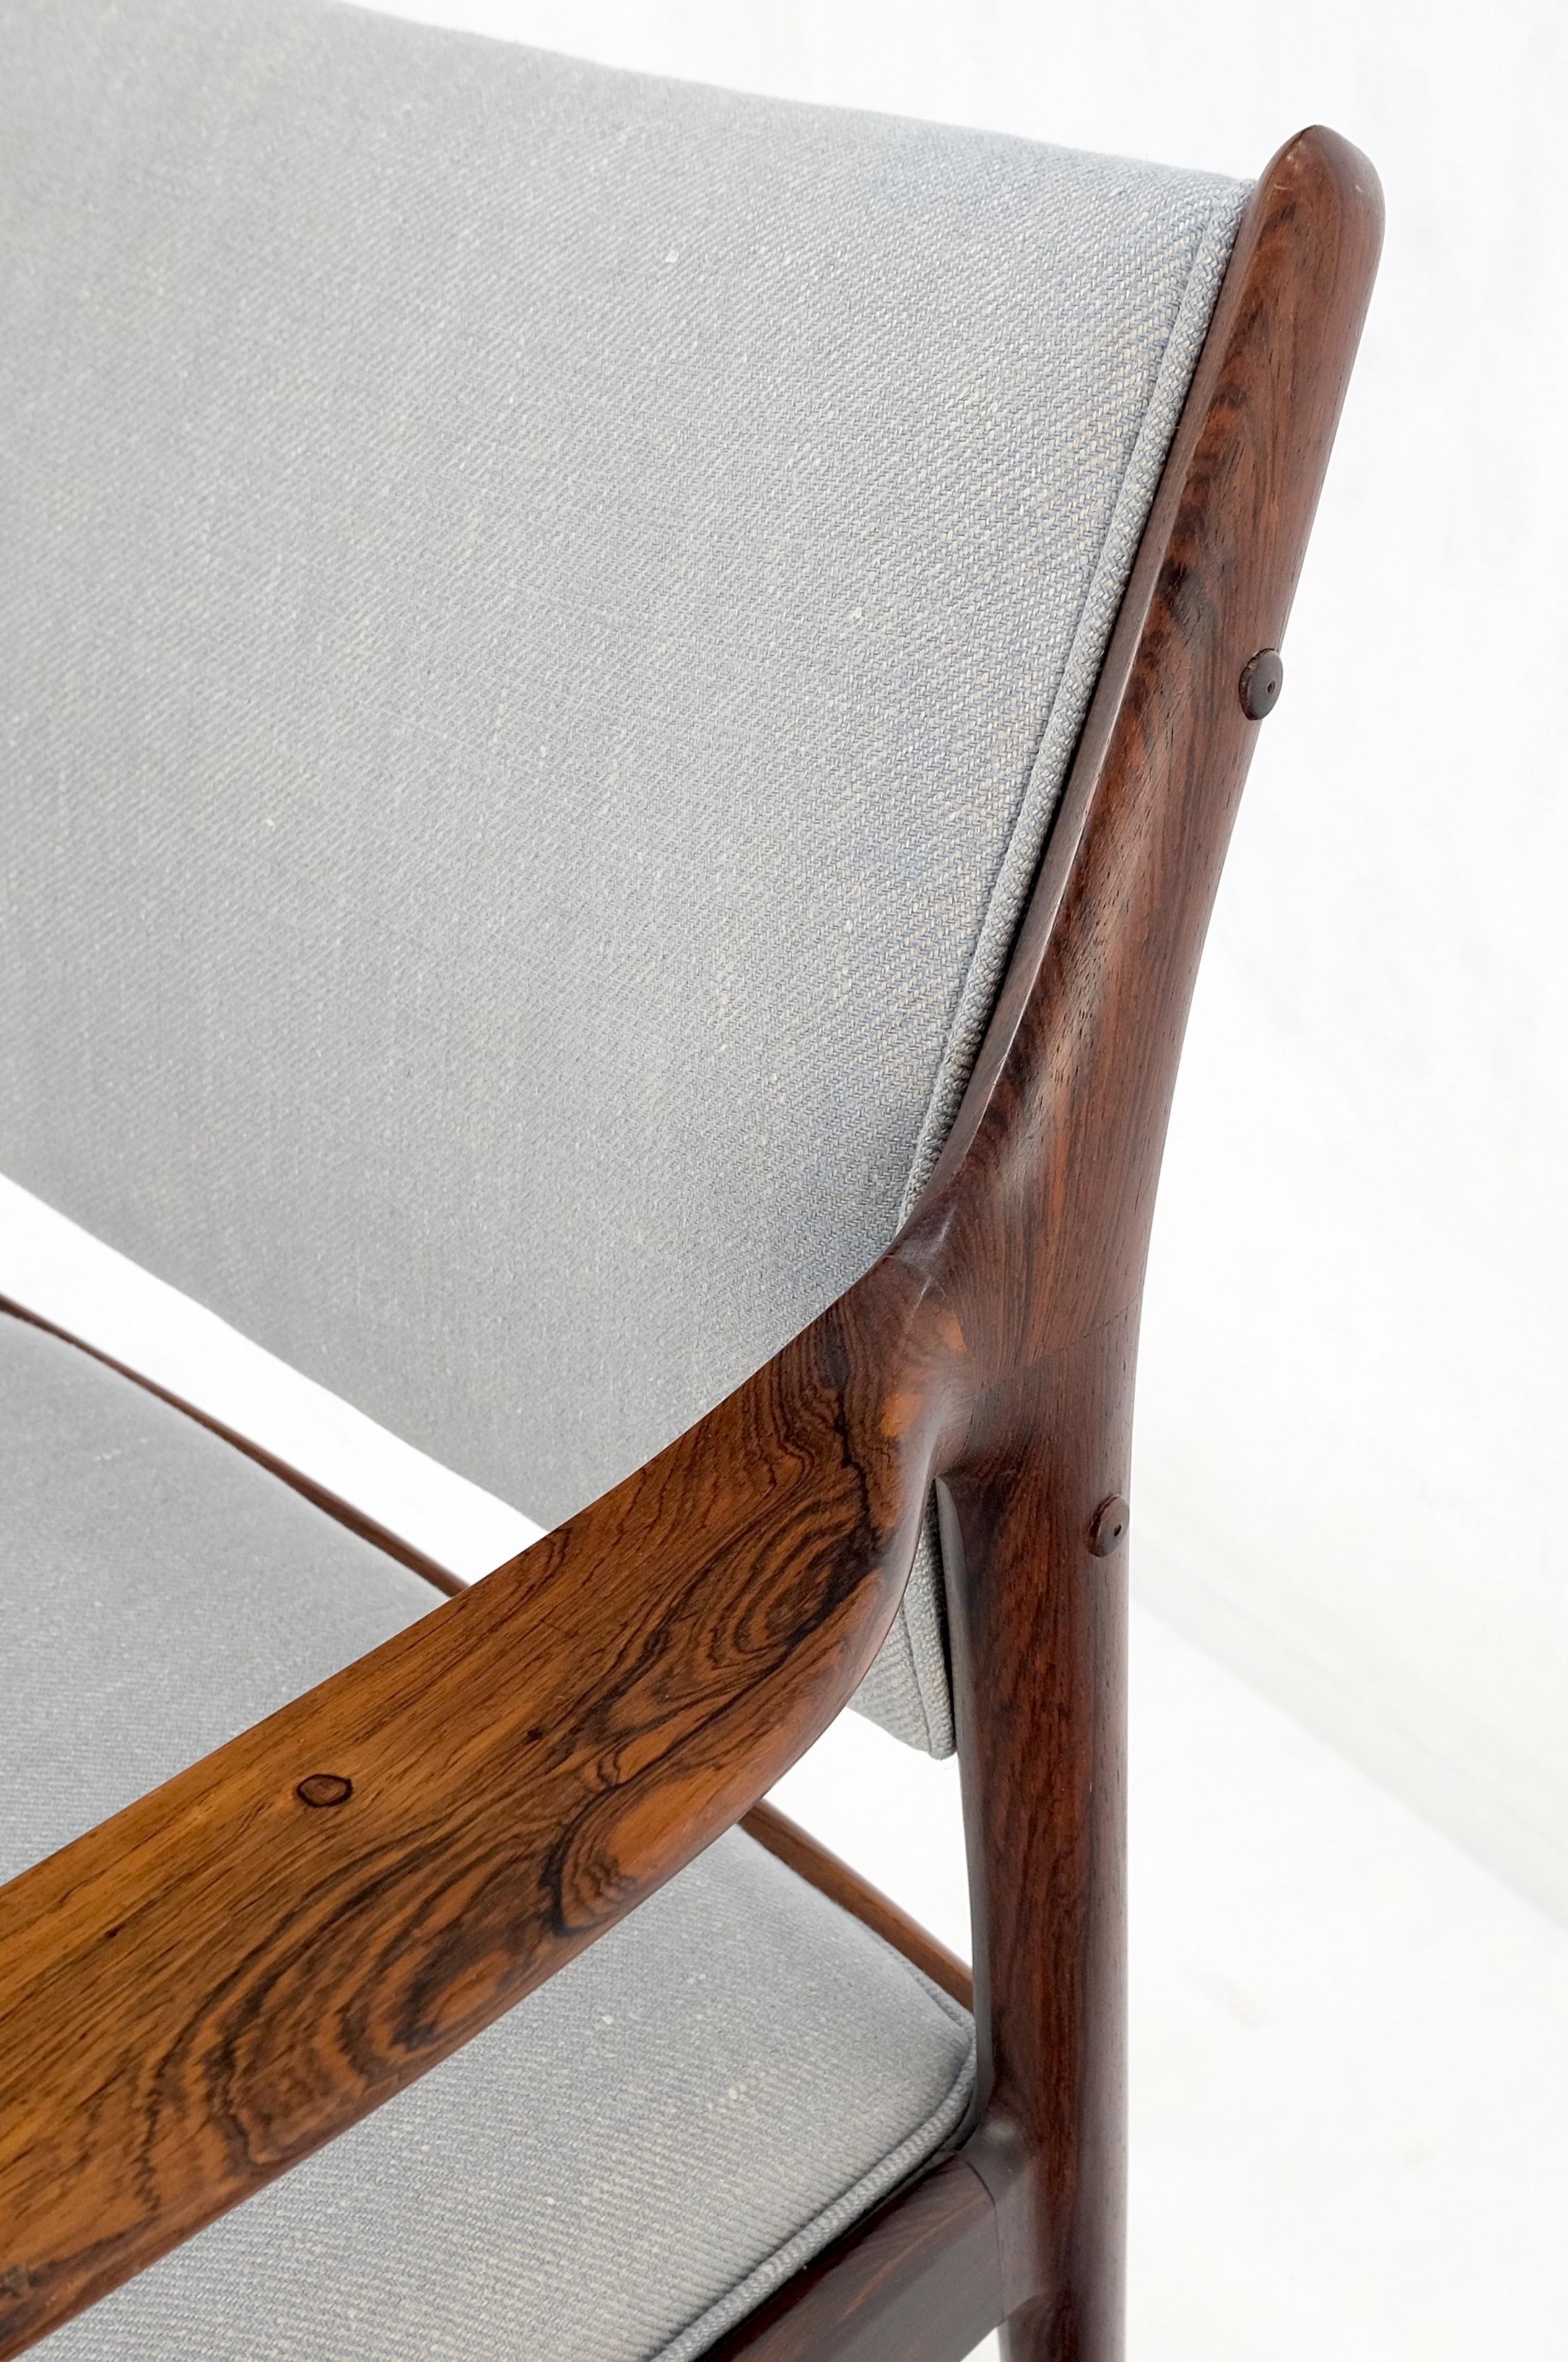 Finn Juhl Attributed Heavy Solid Rosewood Arm Desk Chair New Upholstery Mint! In Good Condition For Sale In Rockaway, NJ